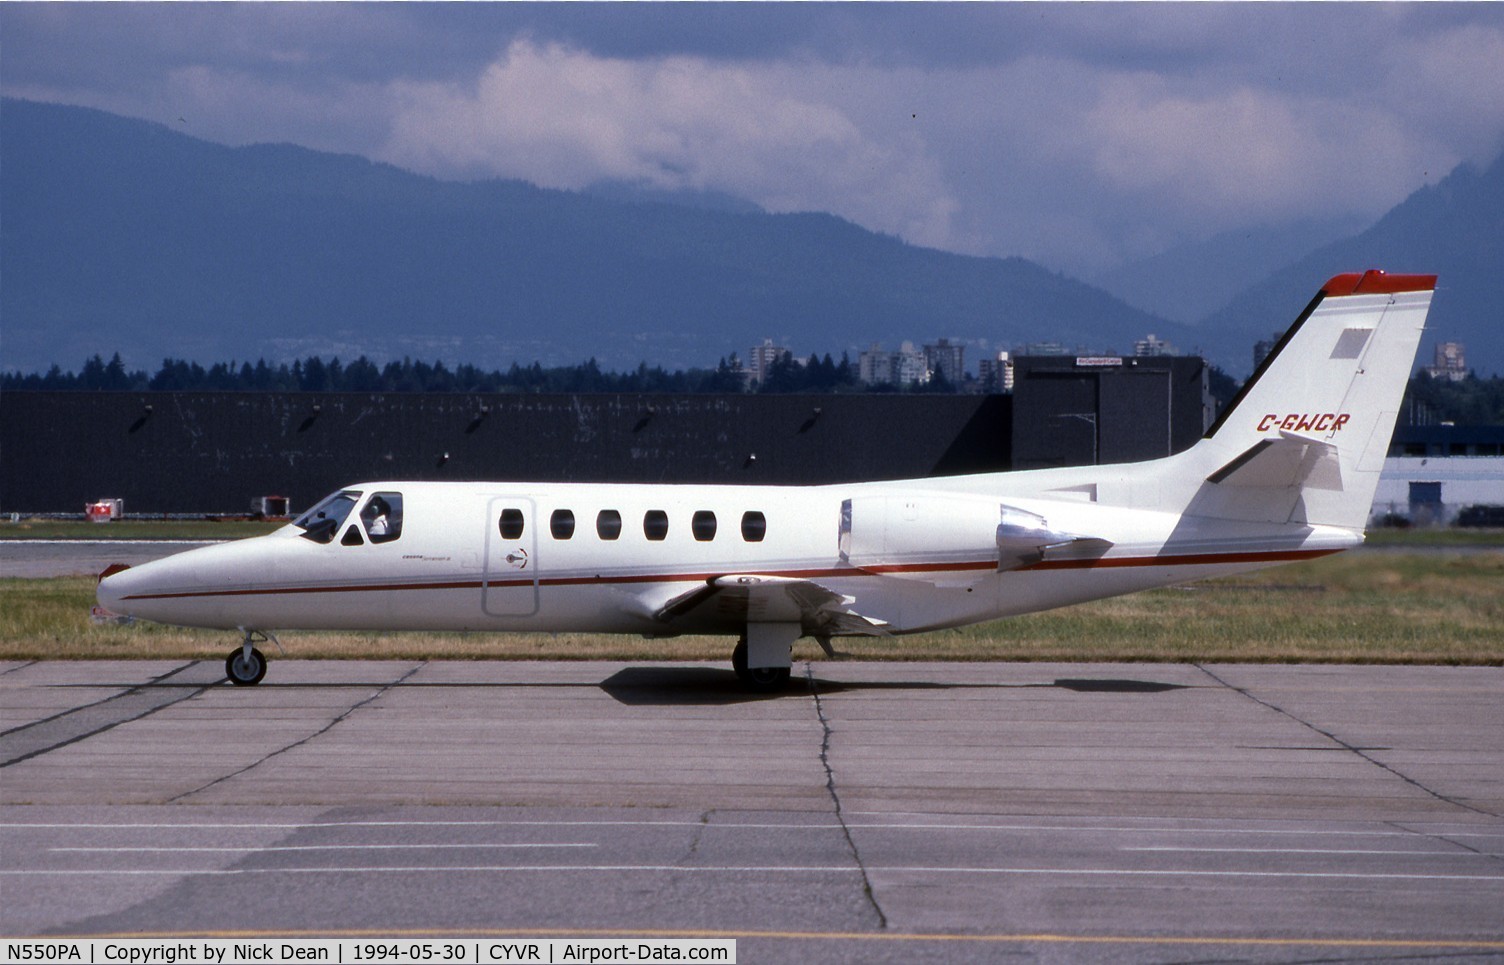 N550PA, 1980 Cessna 550 C/N 550-0191, CYVR (Seen here as C-GWCR this aircraft is now registered N550PA as posted)